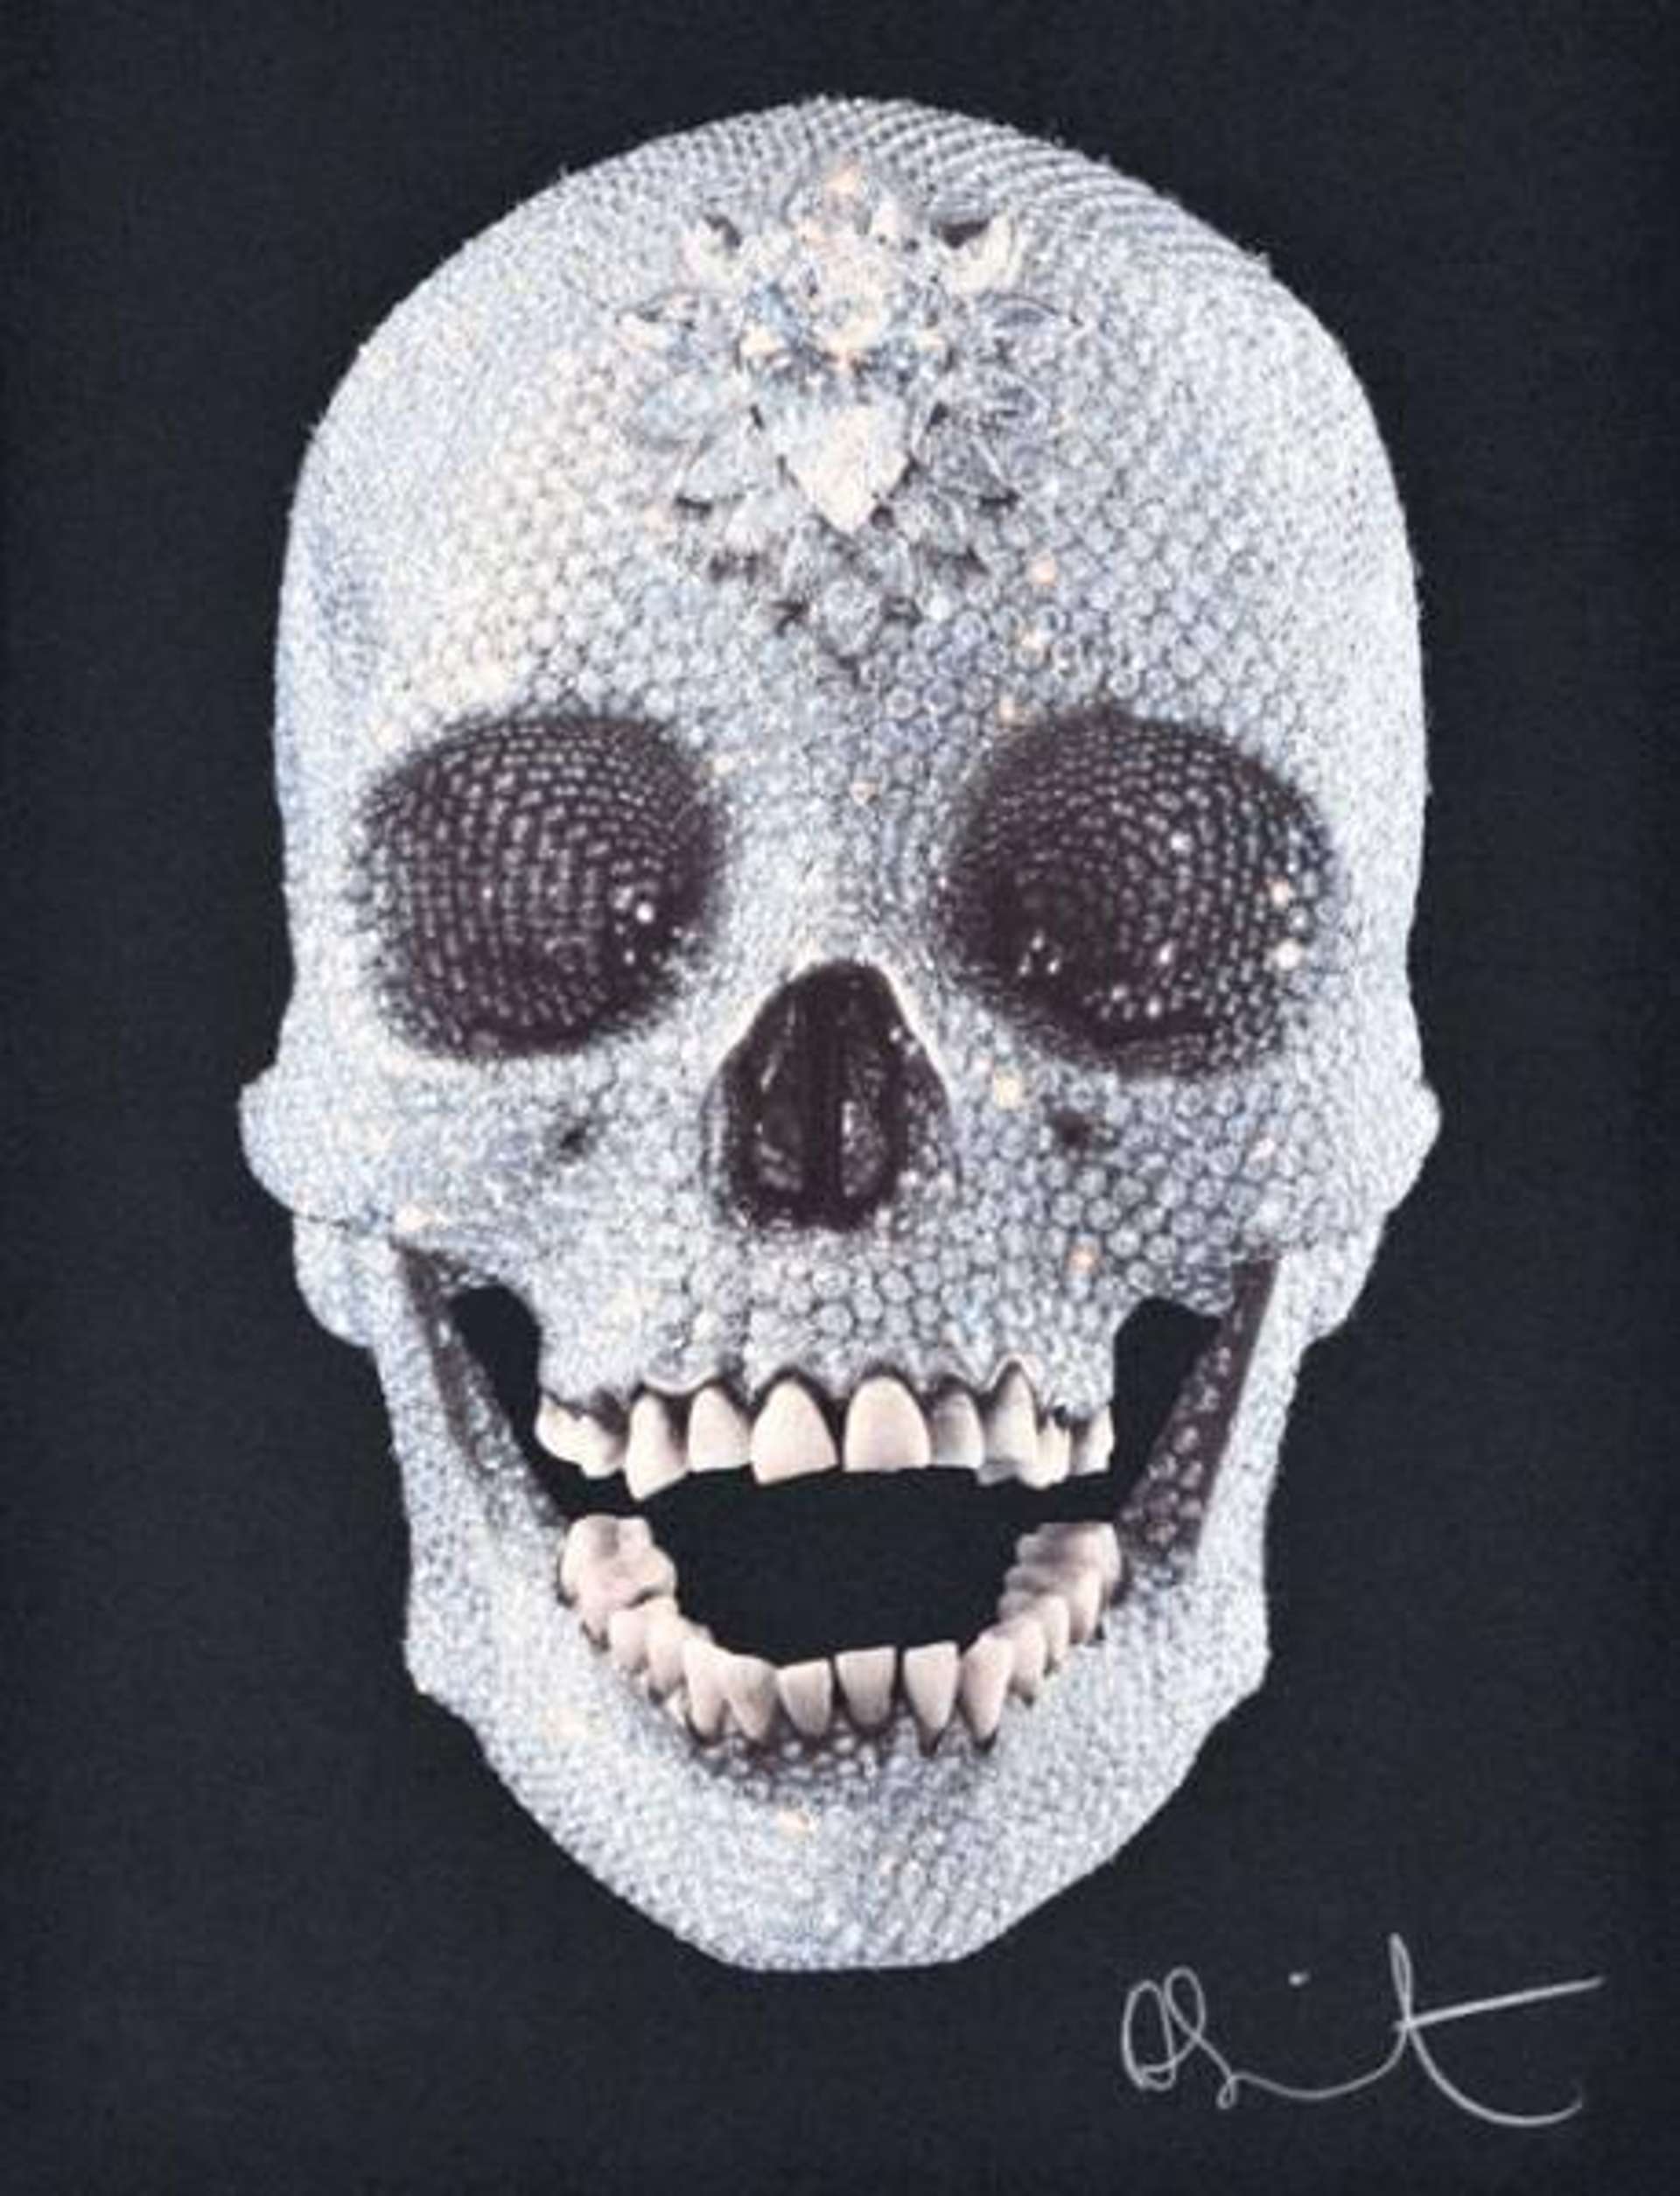 For the Love of God (black) by Damien Hirst